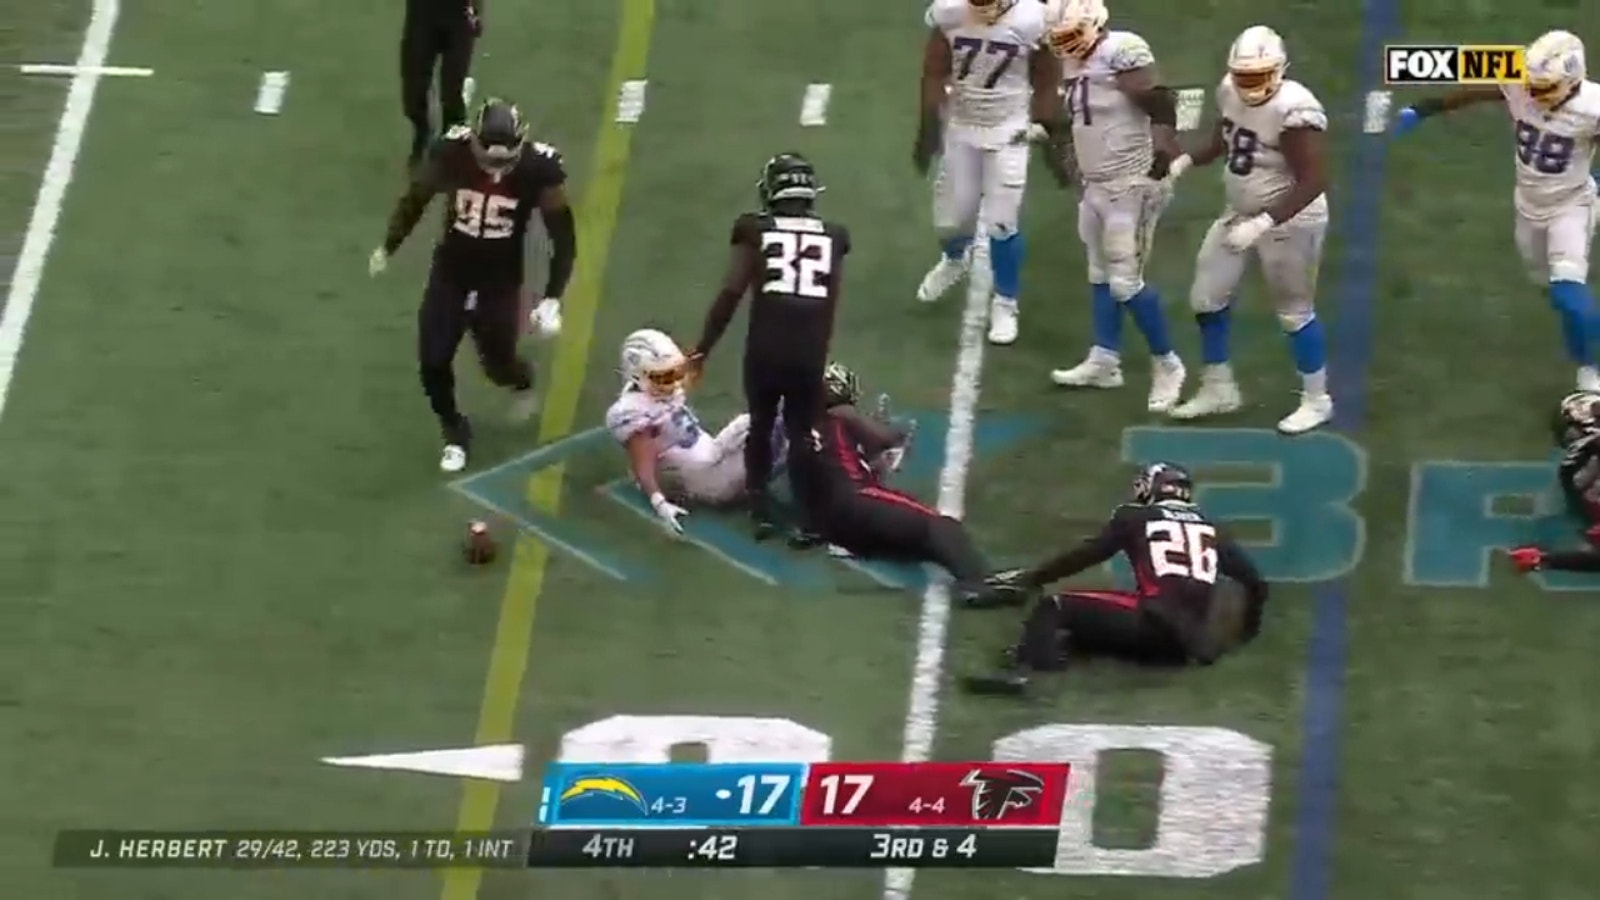 Chargers, Falcons fumble twice on the same play